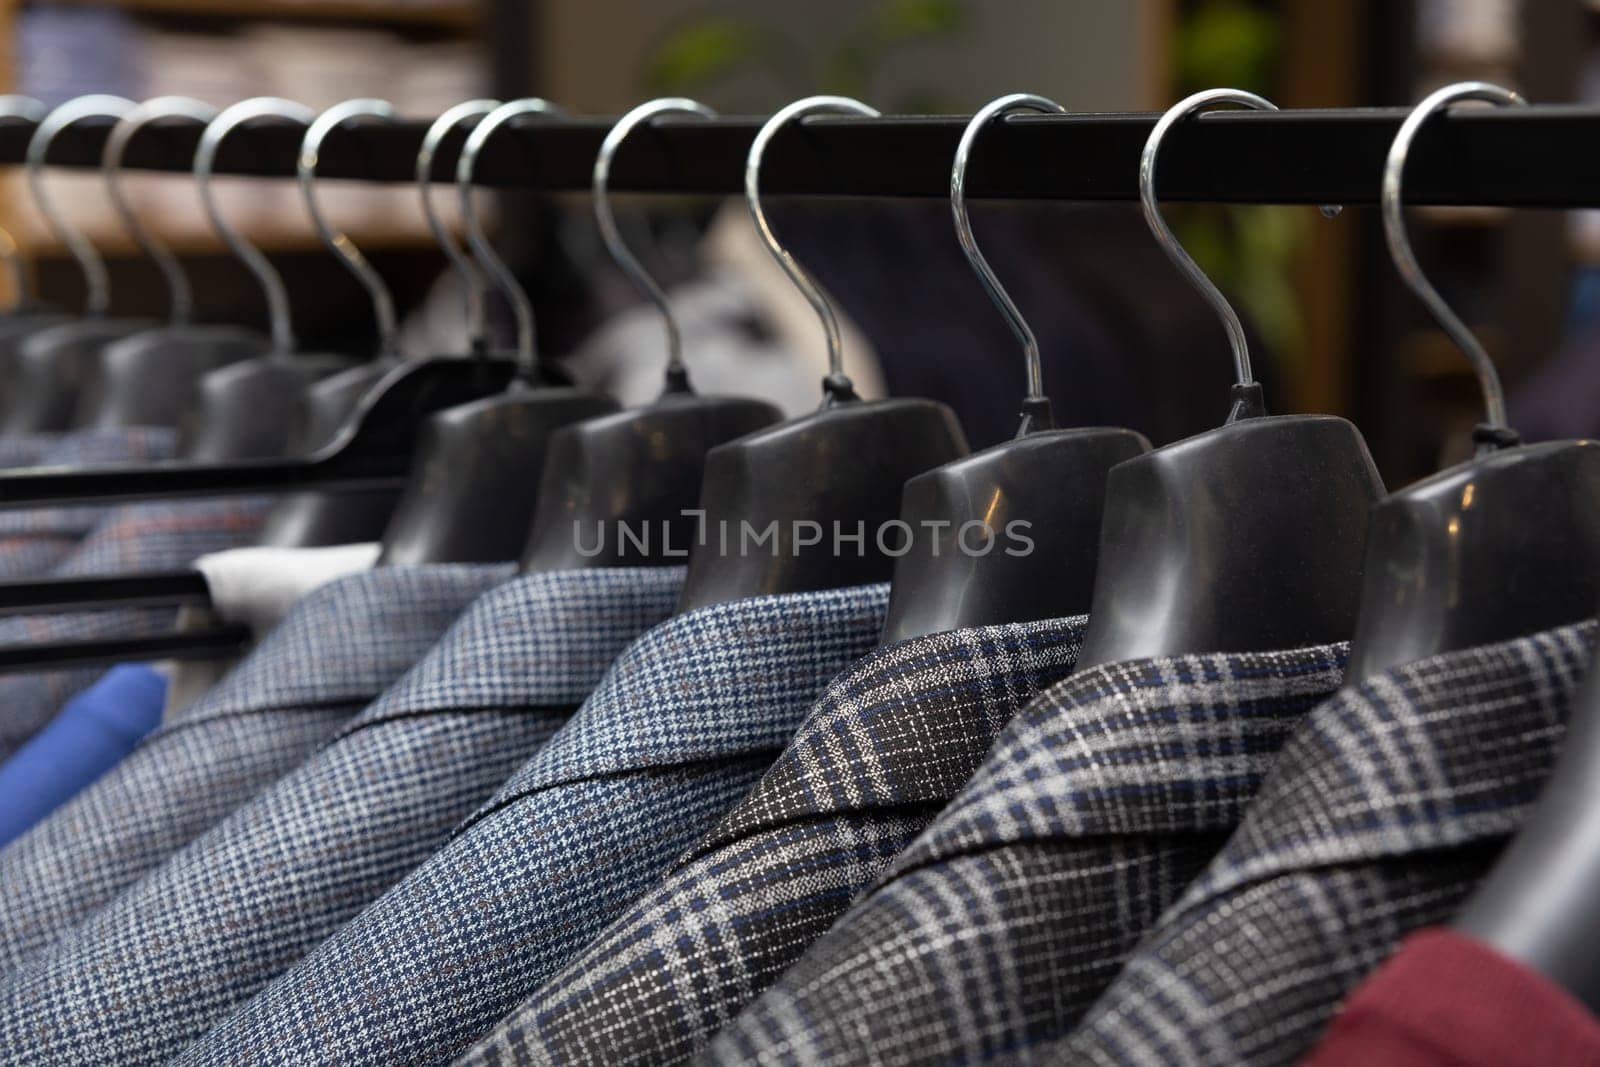 A row of men's suits, jackets hanging on a rack for display. by BY-_-BY